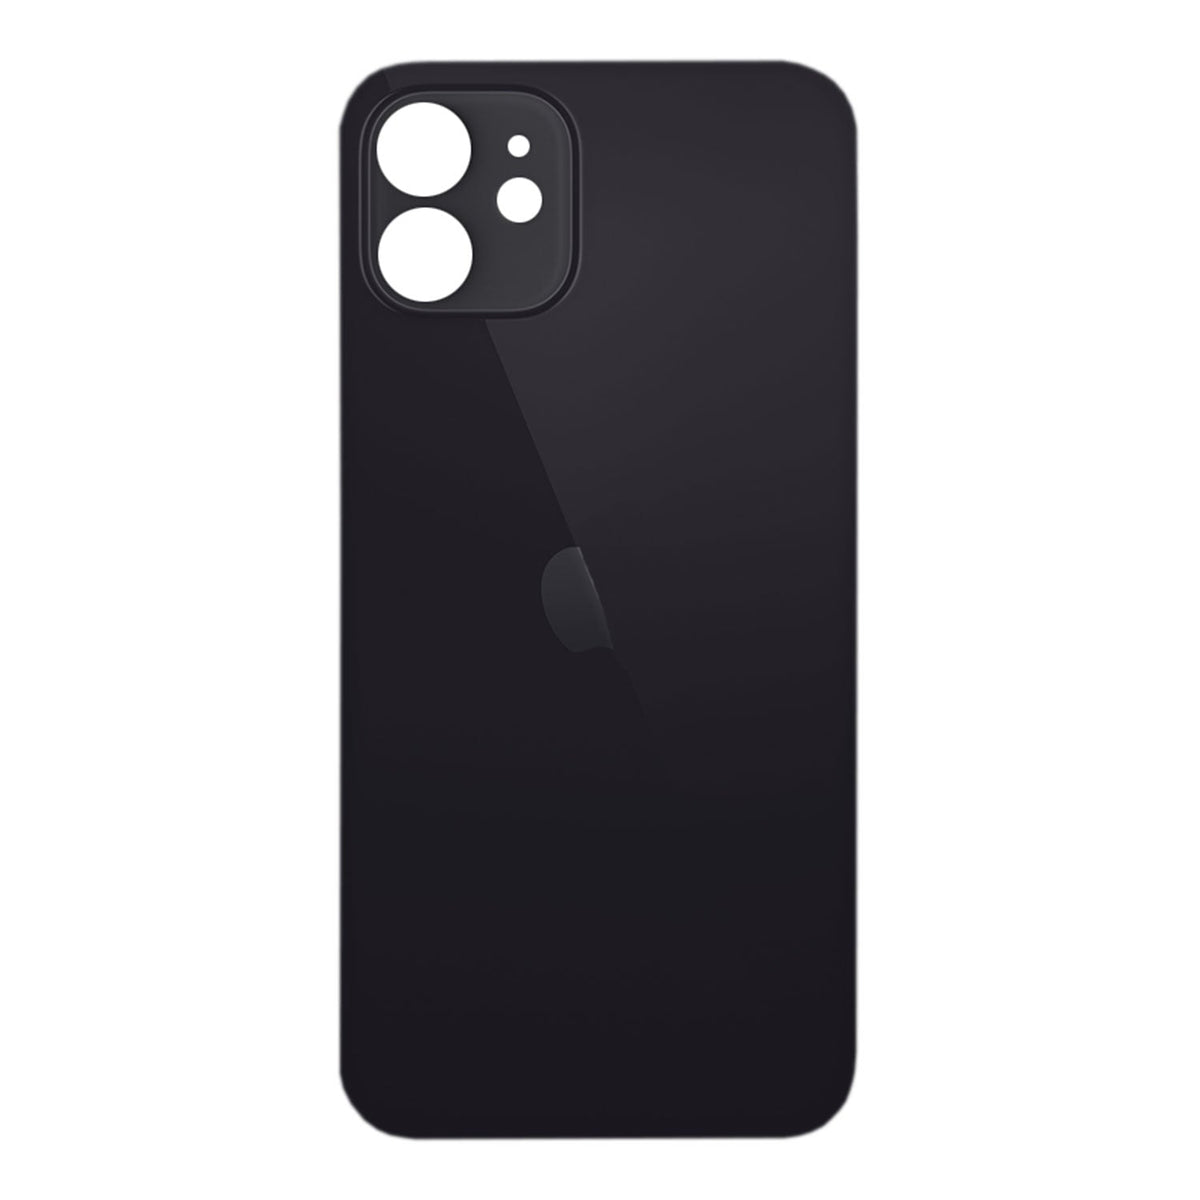 BACK COVER FOR IPHONE 12 - BLACK